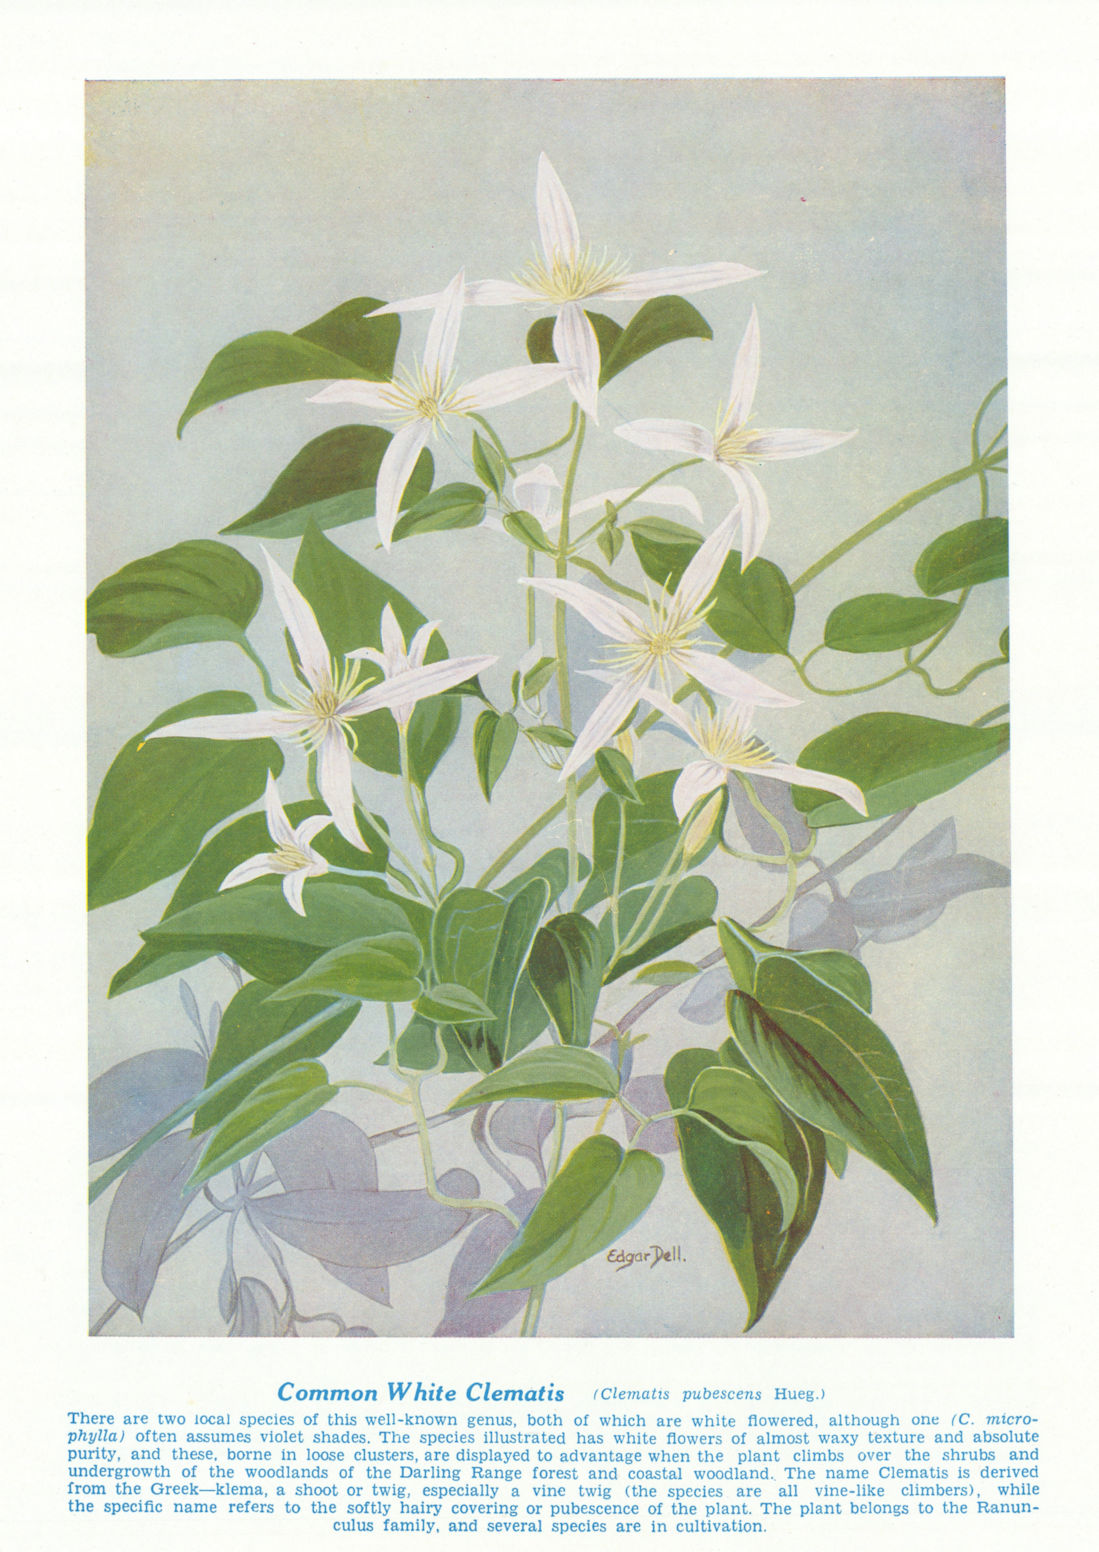 Associate Product Common White Clematis (Clematis pubescens). West Australian Wild Flowers 1950